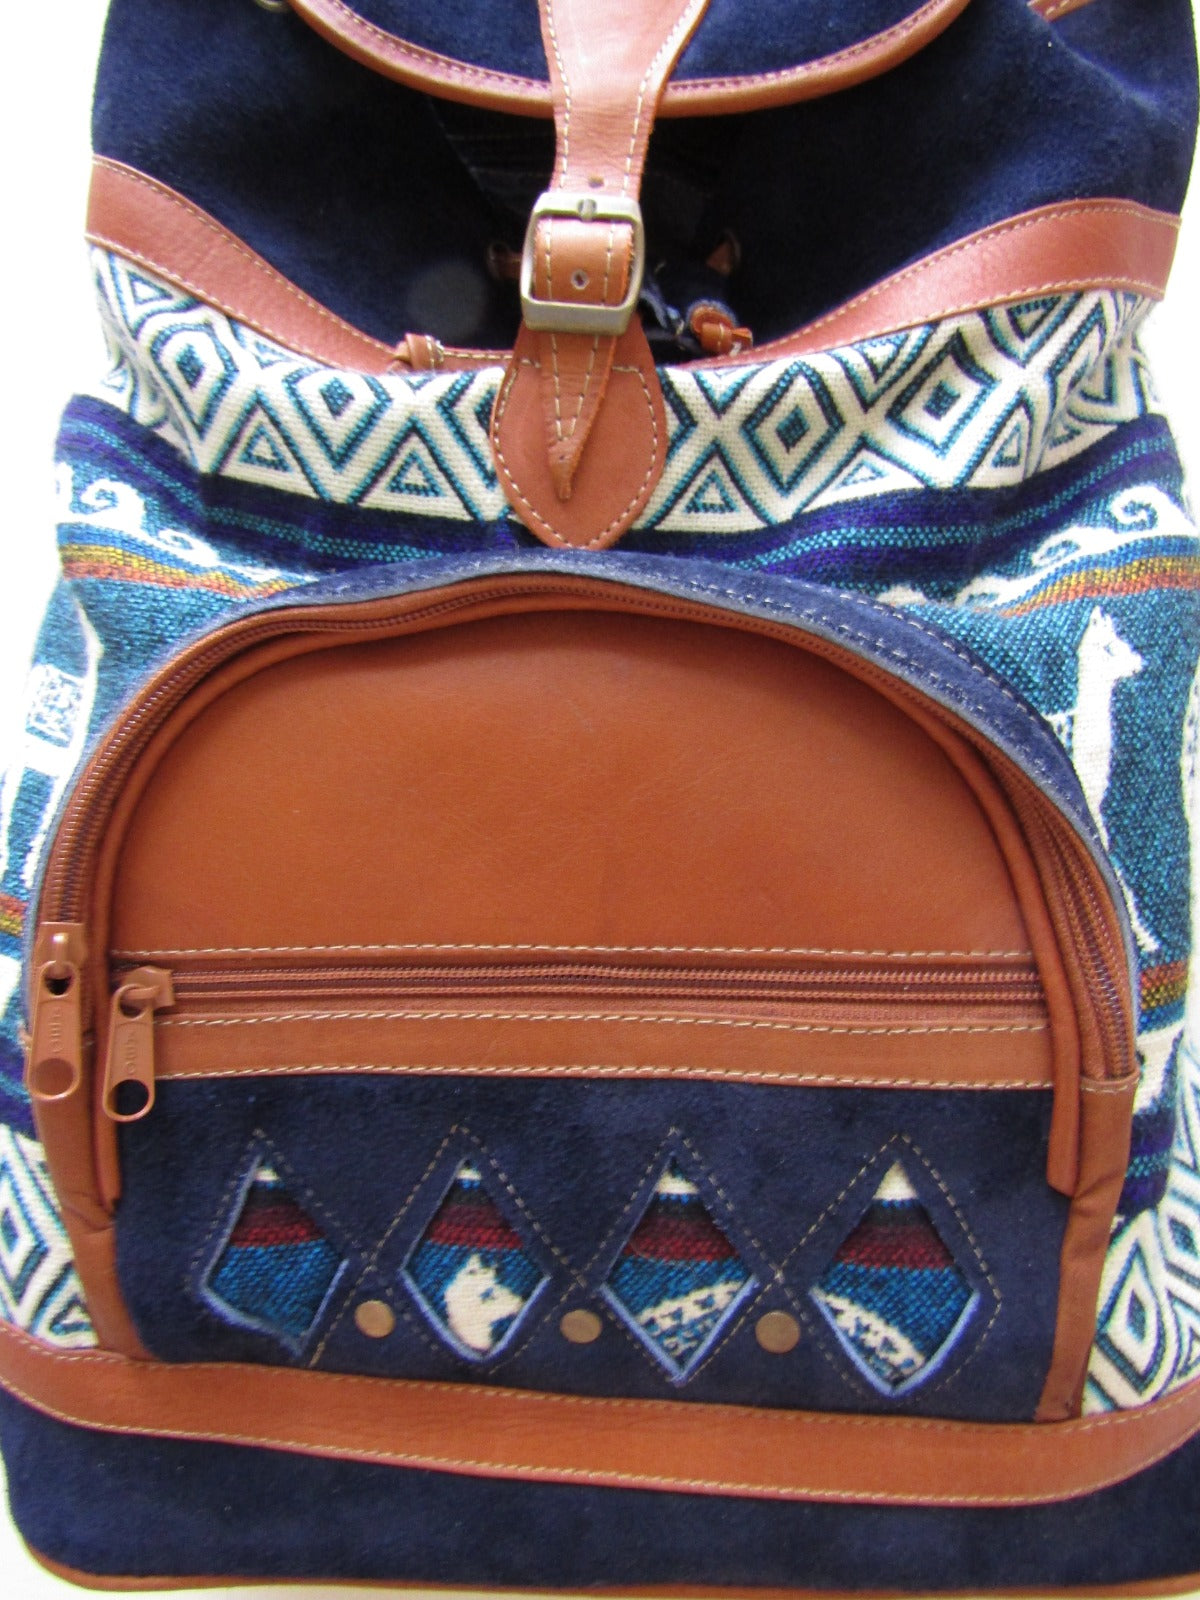 Backpack With Suede Leather/Ethnic Andean Handmade Genuine Leather Aguayo / Uniquely Designed For Individual Distinction